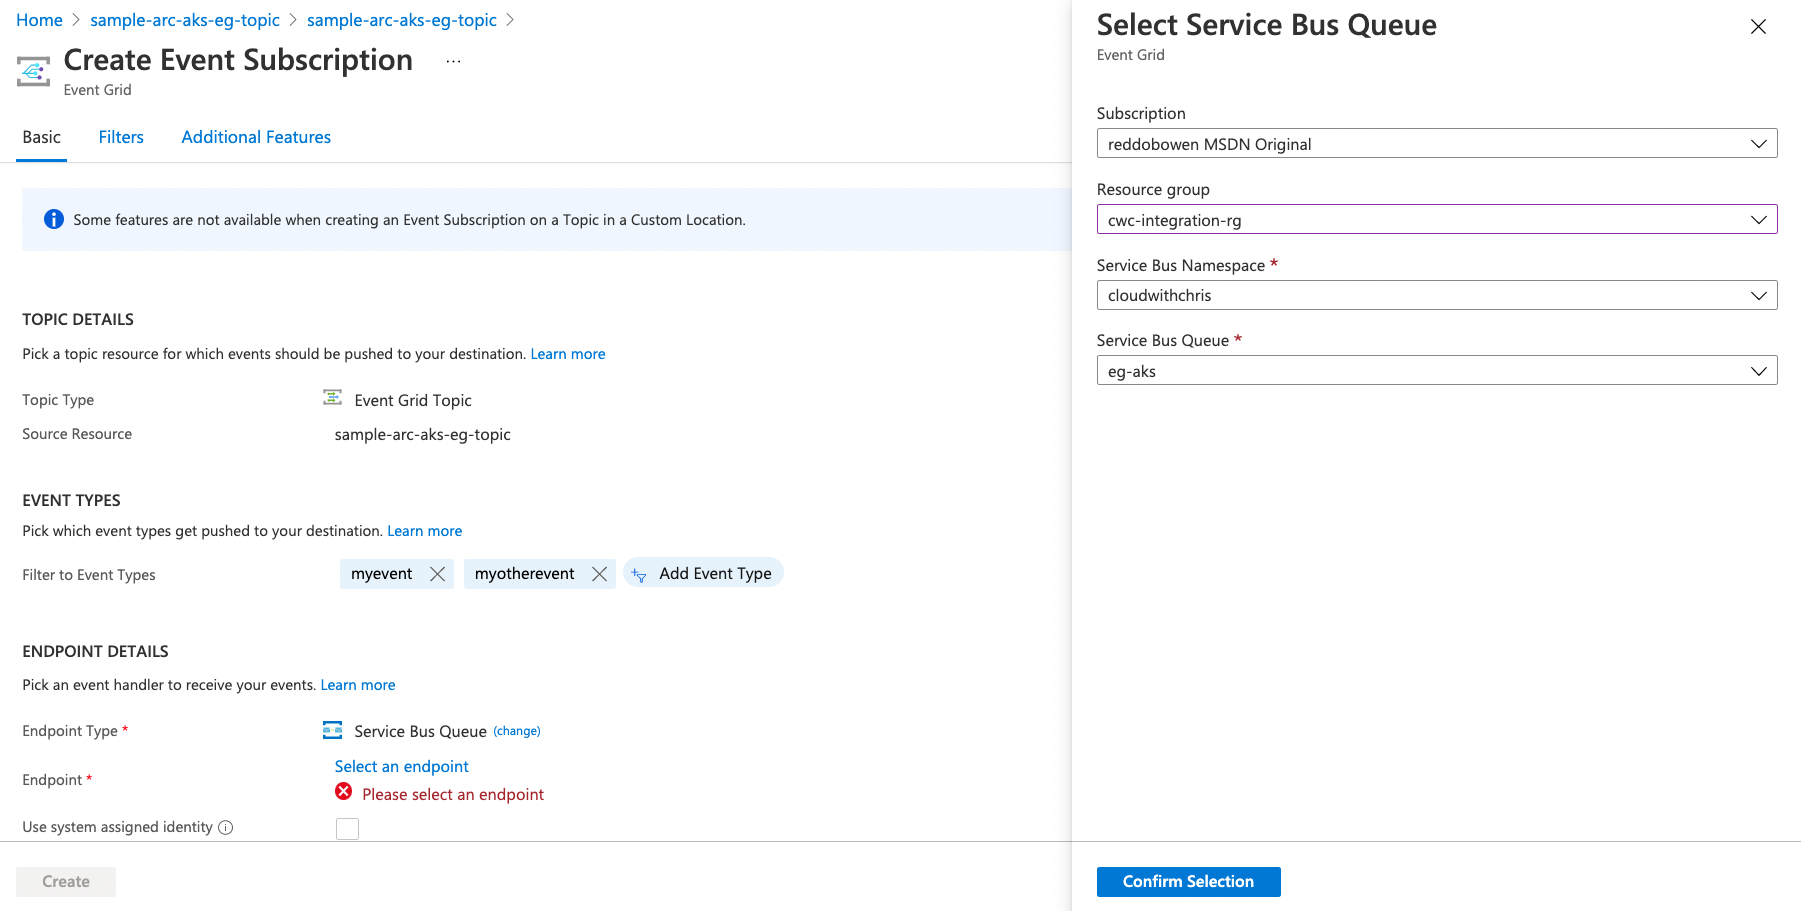 Screenshot showing the Select Service Bus Queue blade in the Create Event Subscription experinece